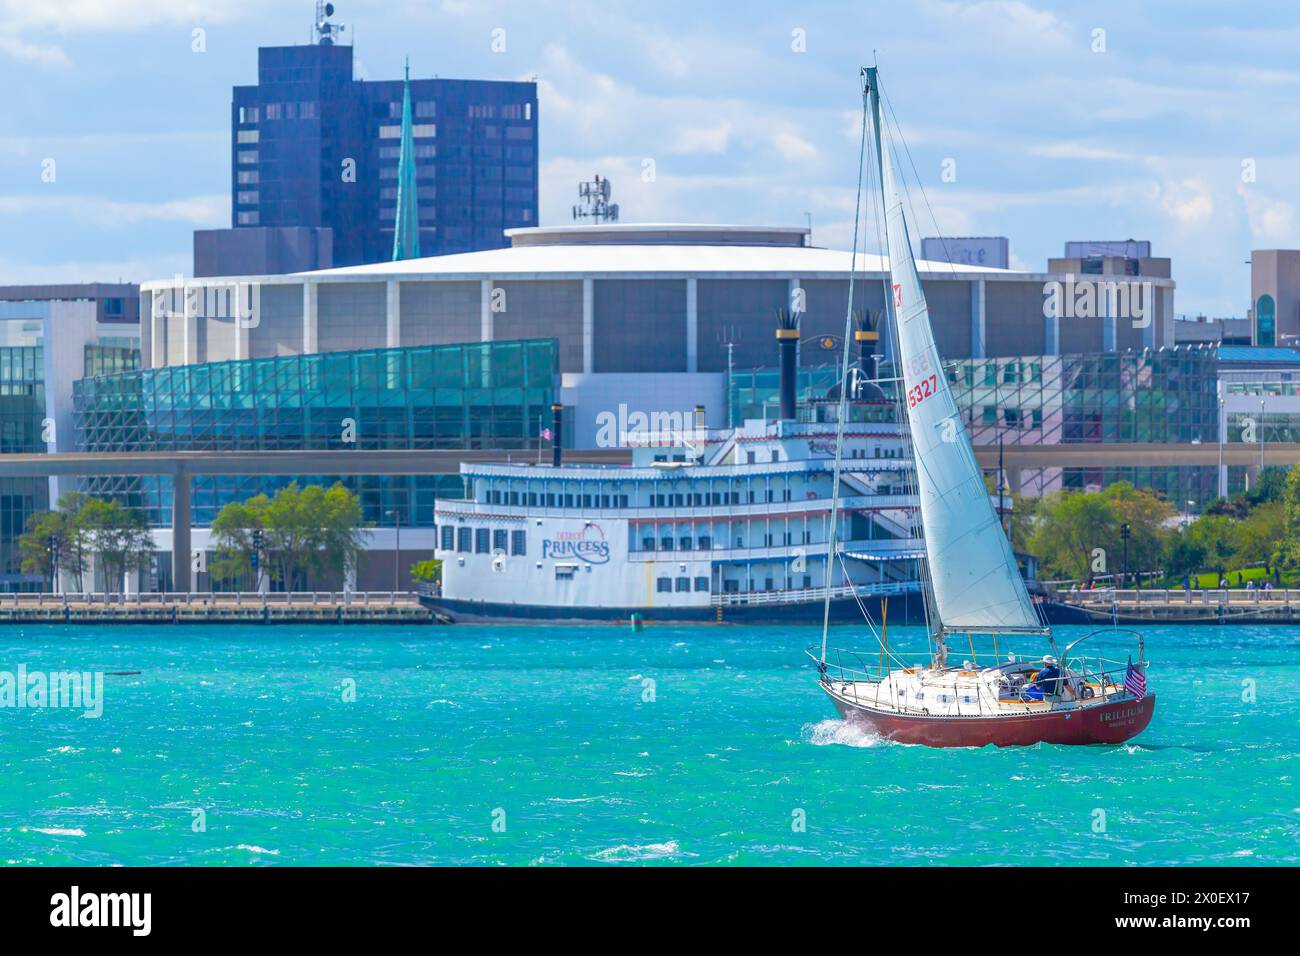 Sailing on the Detroit River in Detroit, Michigan, USA, with the Detroit International Riverfront in the background. Stock Photo